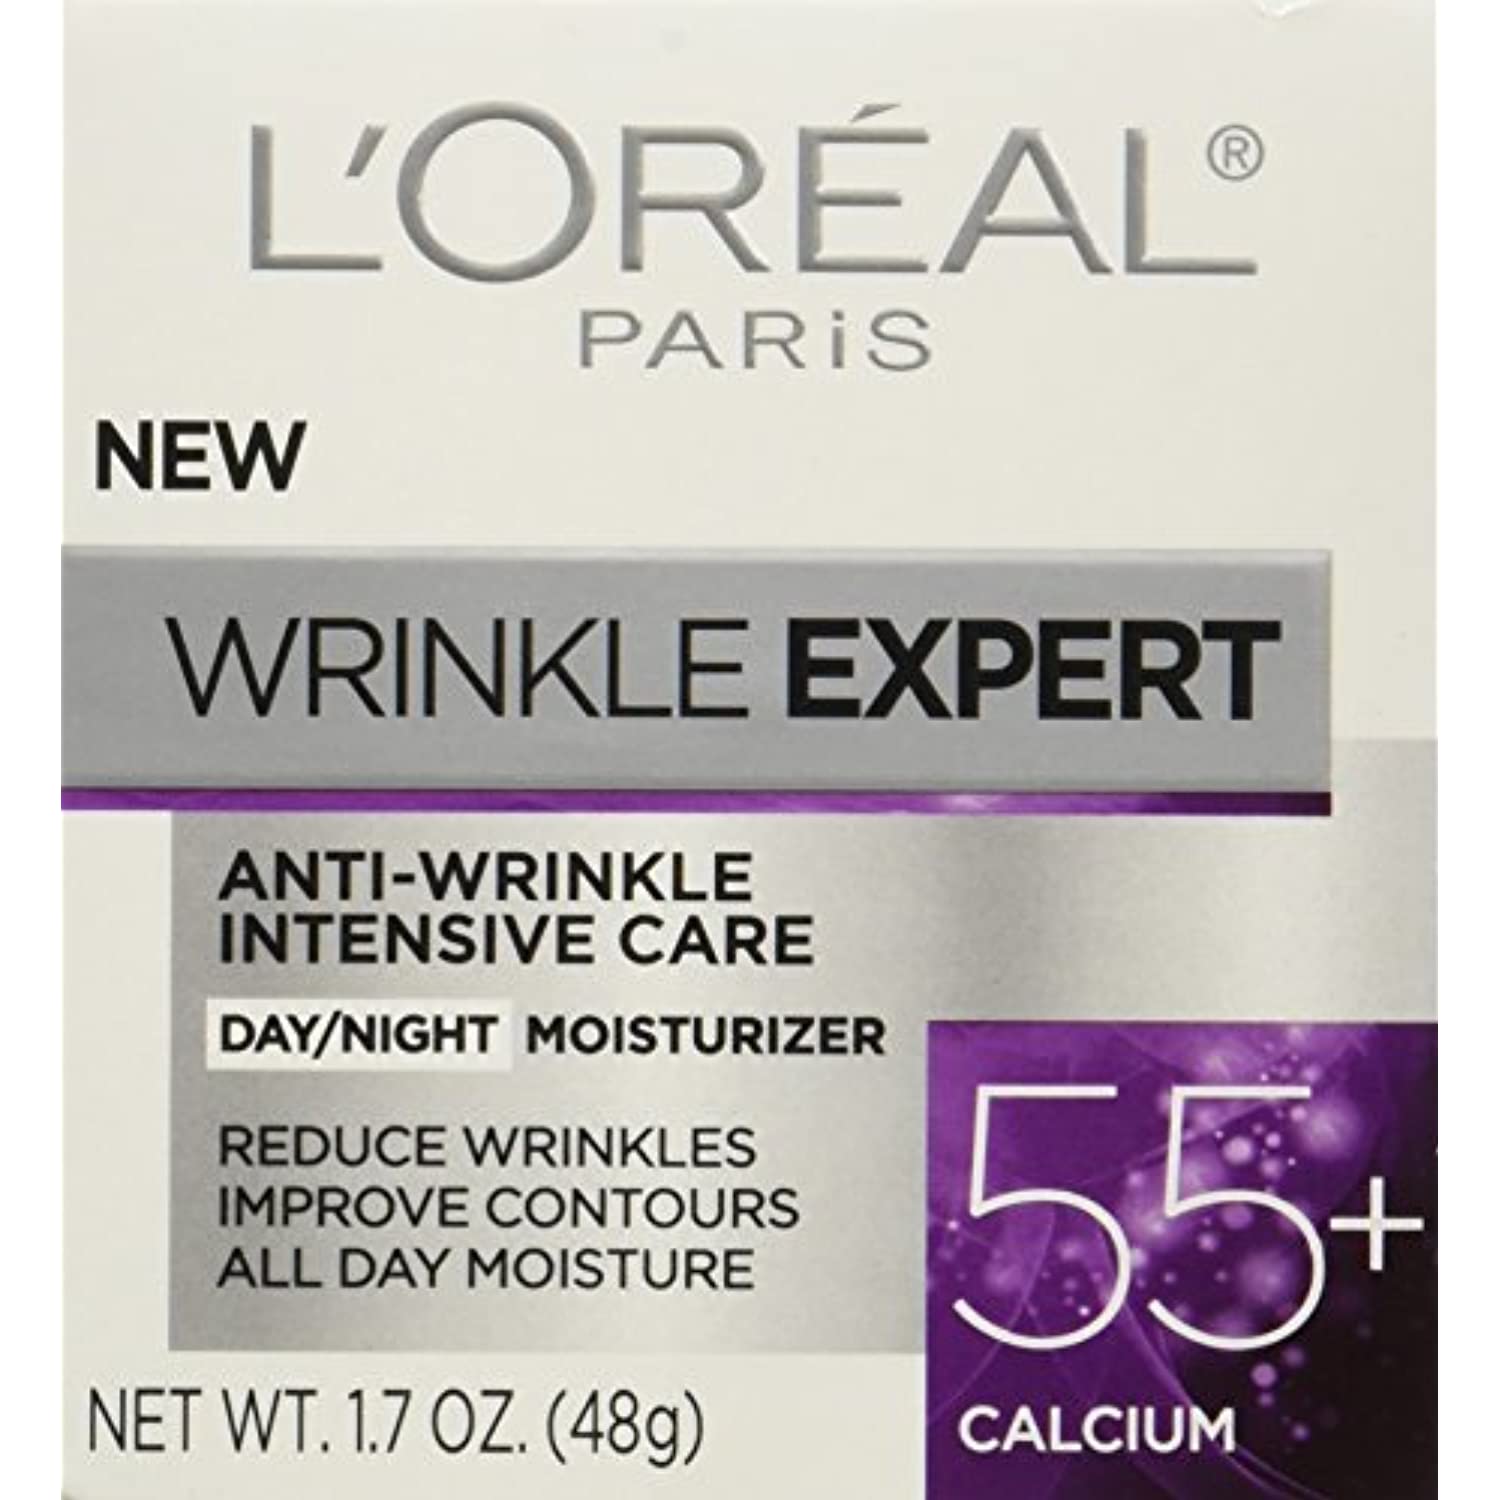 Loreal Paris Skincare Wrinkle Expert 55+ Anti-Aging Face Moisturizer With Calcium Non-Greasy Suitable For Sensitive Skin 1.7 Fl; Oz. - image 3 of 3